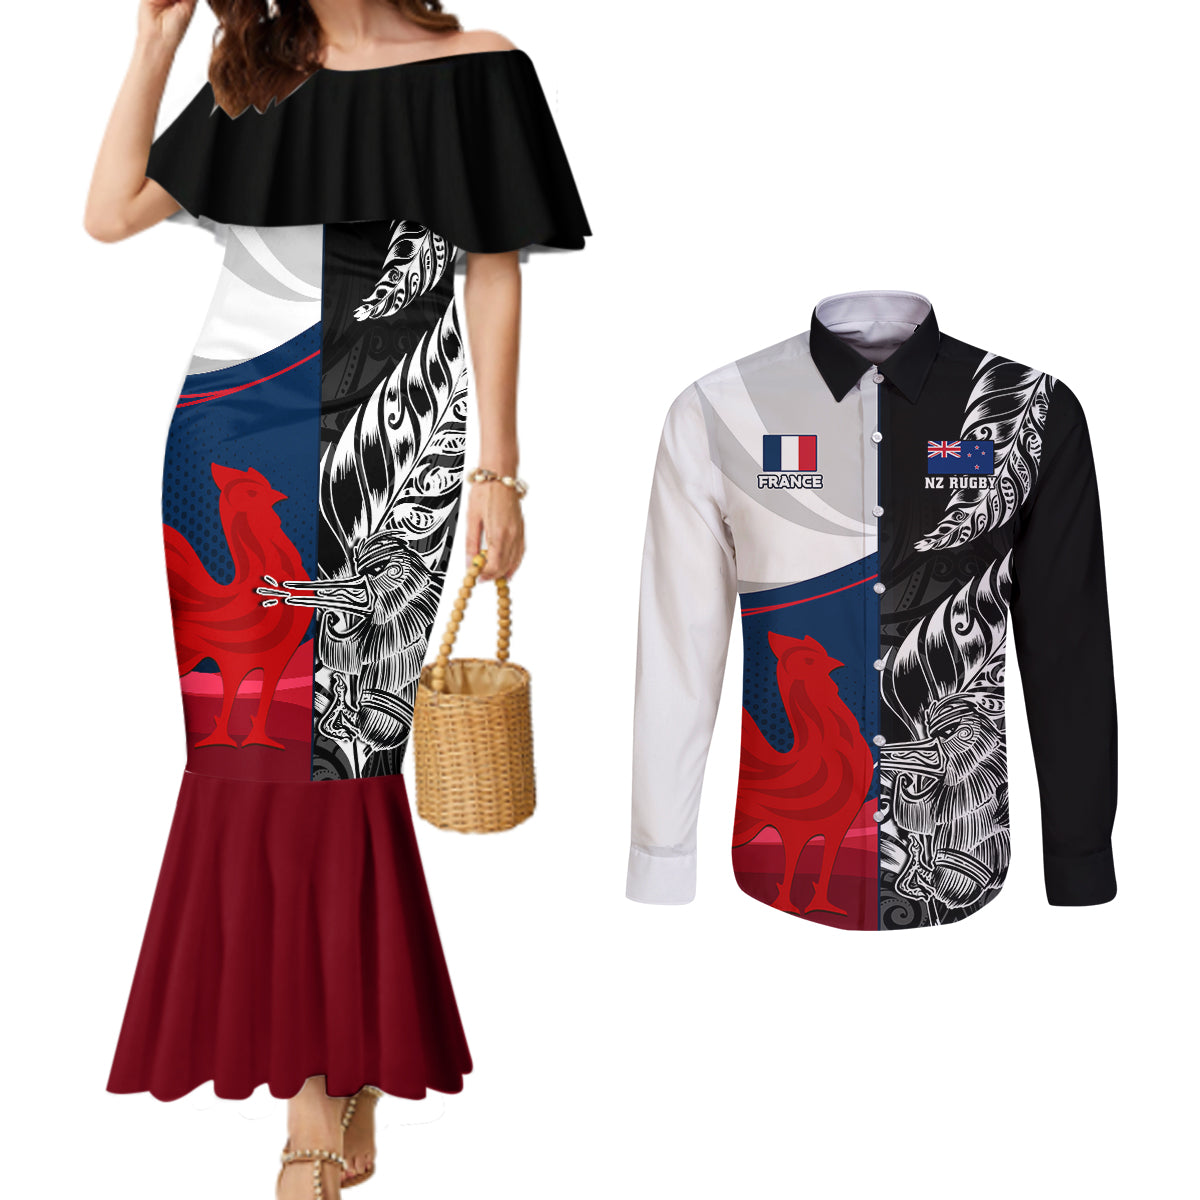 custom-new-zealand-and-france-rugby-couples-matching-mermaid-dress-and-long-sleeve-button-shirts-xv-de-france-kiwi-silver-fern-2023-world-cup